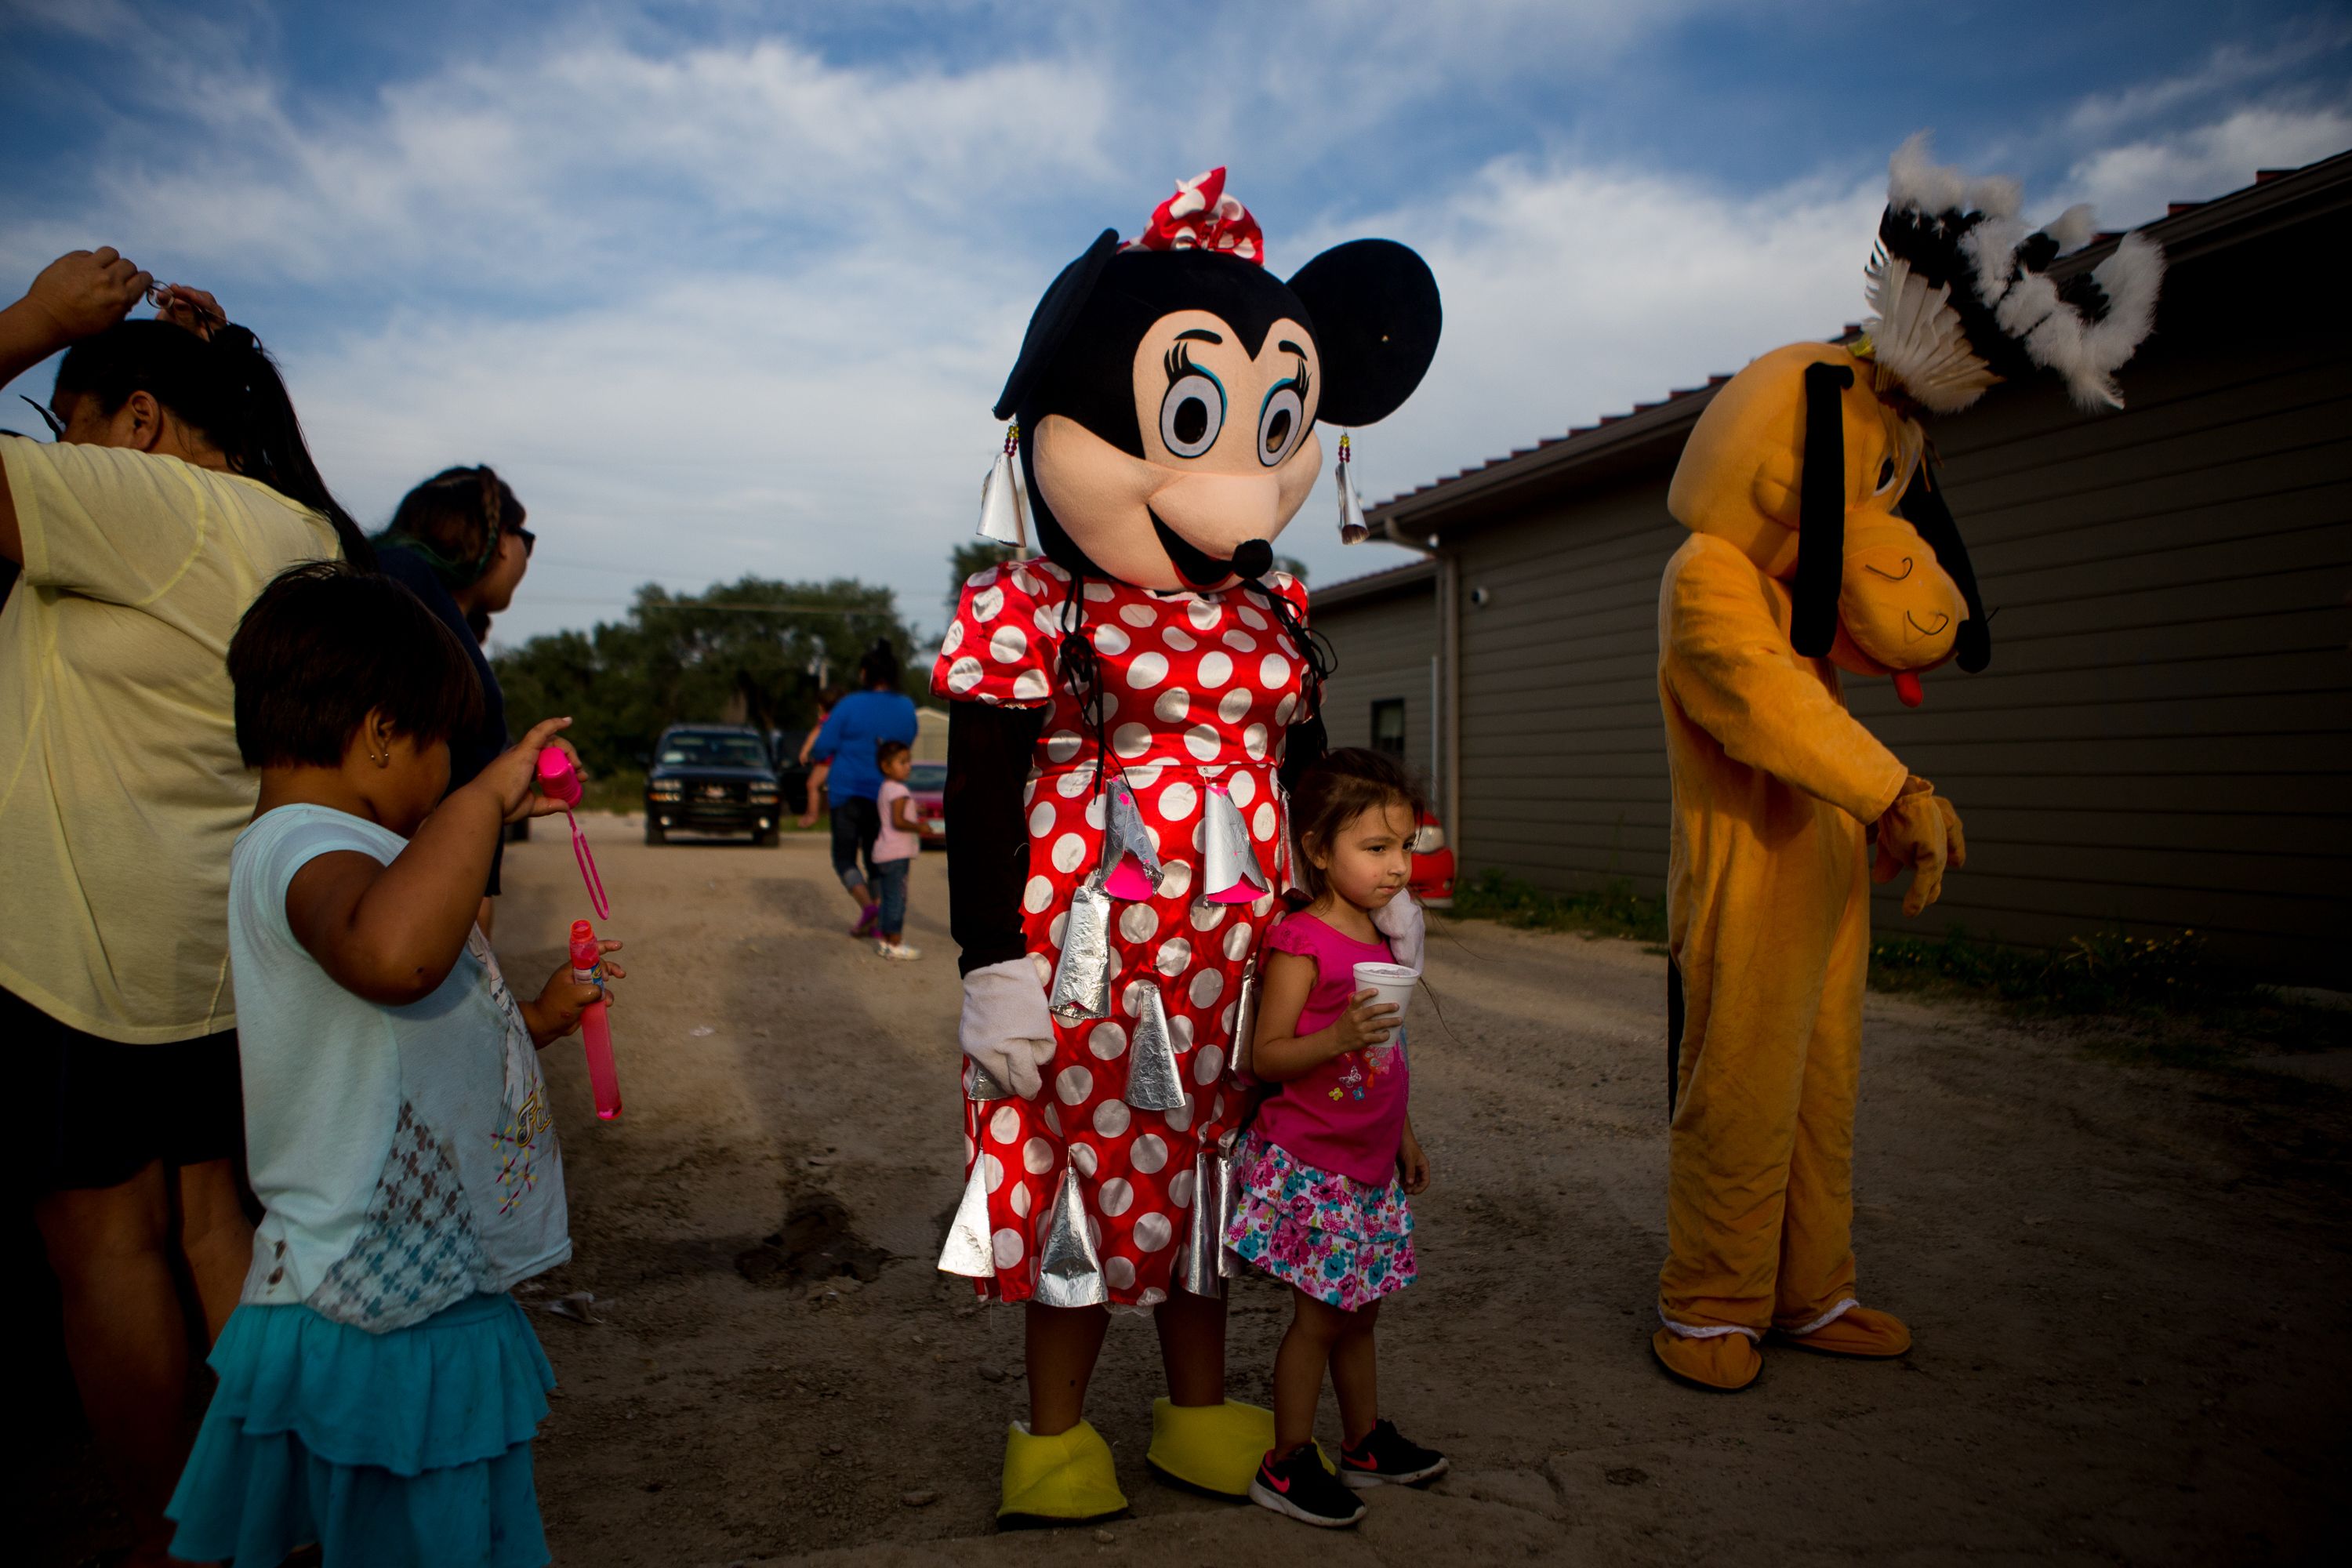  Ella Davis, 4, poses with a "Minnie Mouse" adorned with makeshift jingle bells on September 1, 2018, during the first annual Sicangu Youth Program "Back-to-School" block party in Mission, South Dakota. Image by Brian Munoz. South Dakota, 2018.